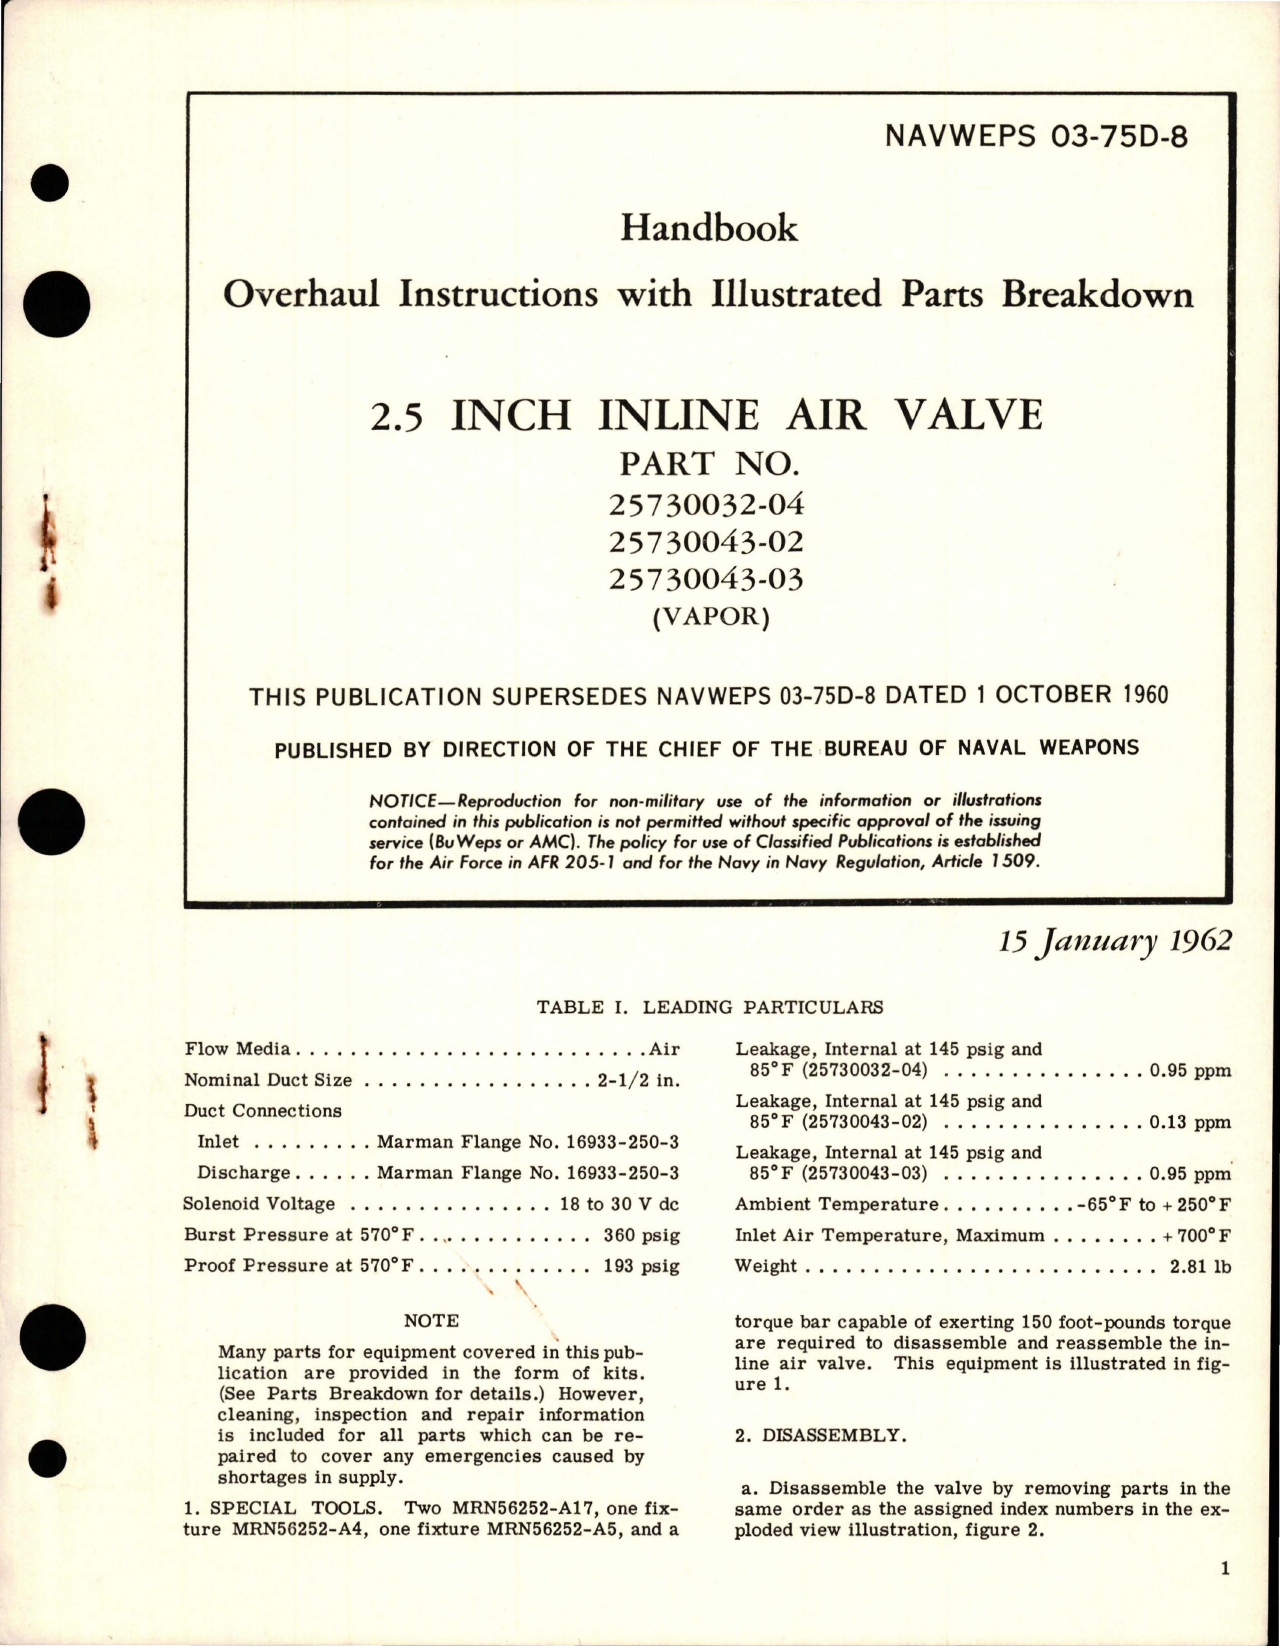 Sample page 1 from AirCorps Library document: Overhaul Instructions with Illustrated Parts Breakdown for Inline Air Valve - 2.5 Inch